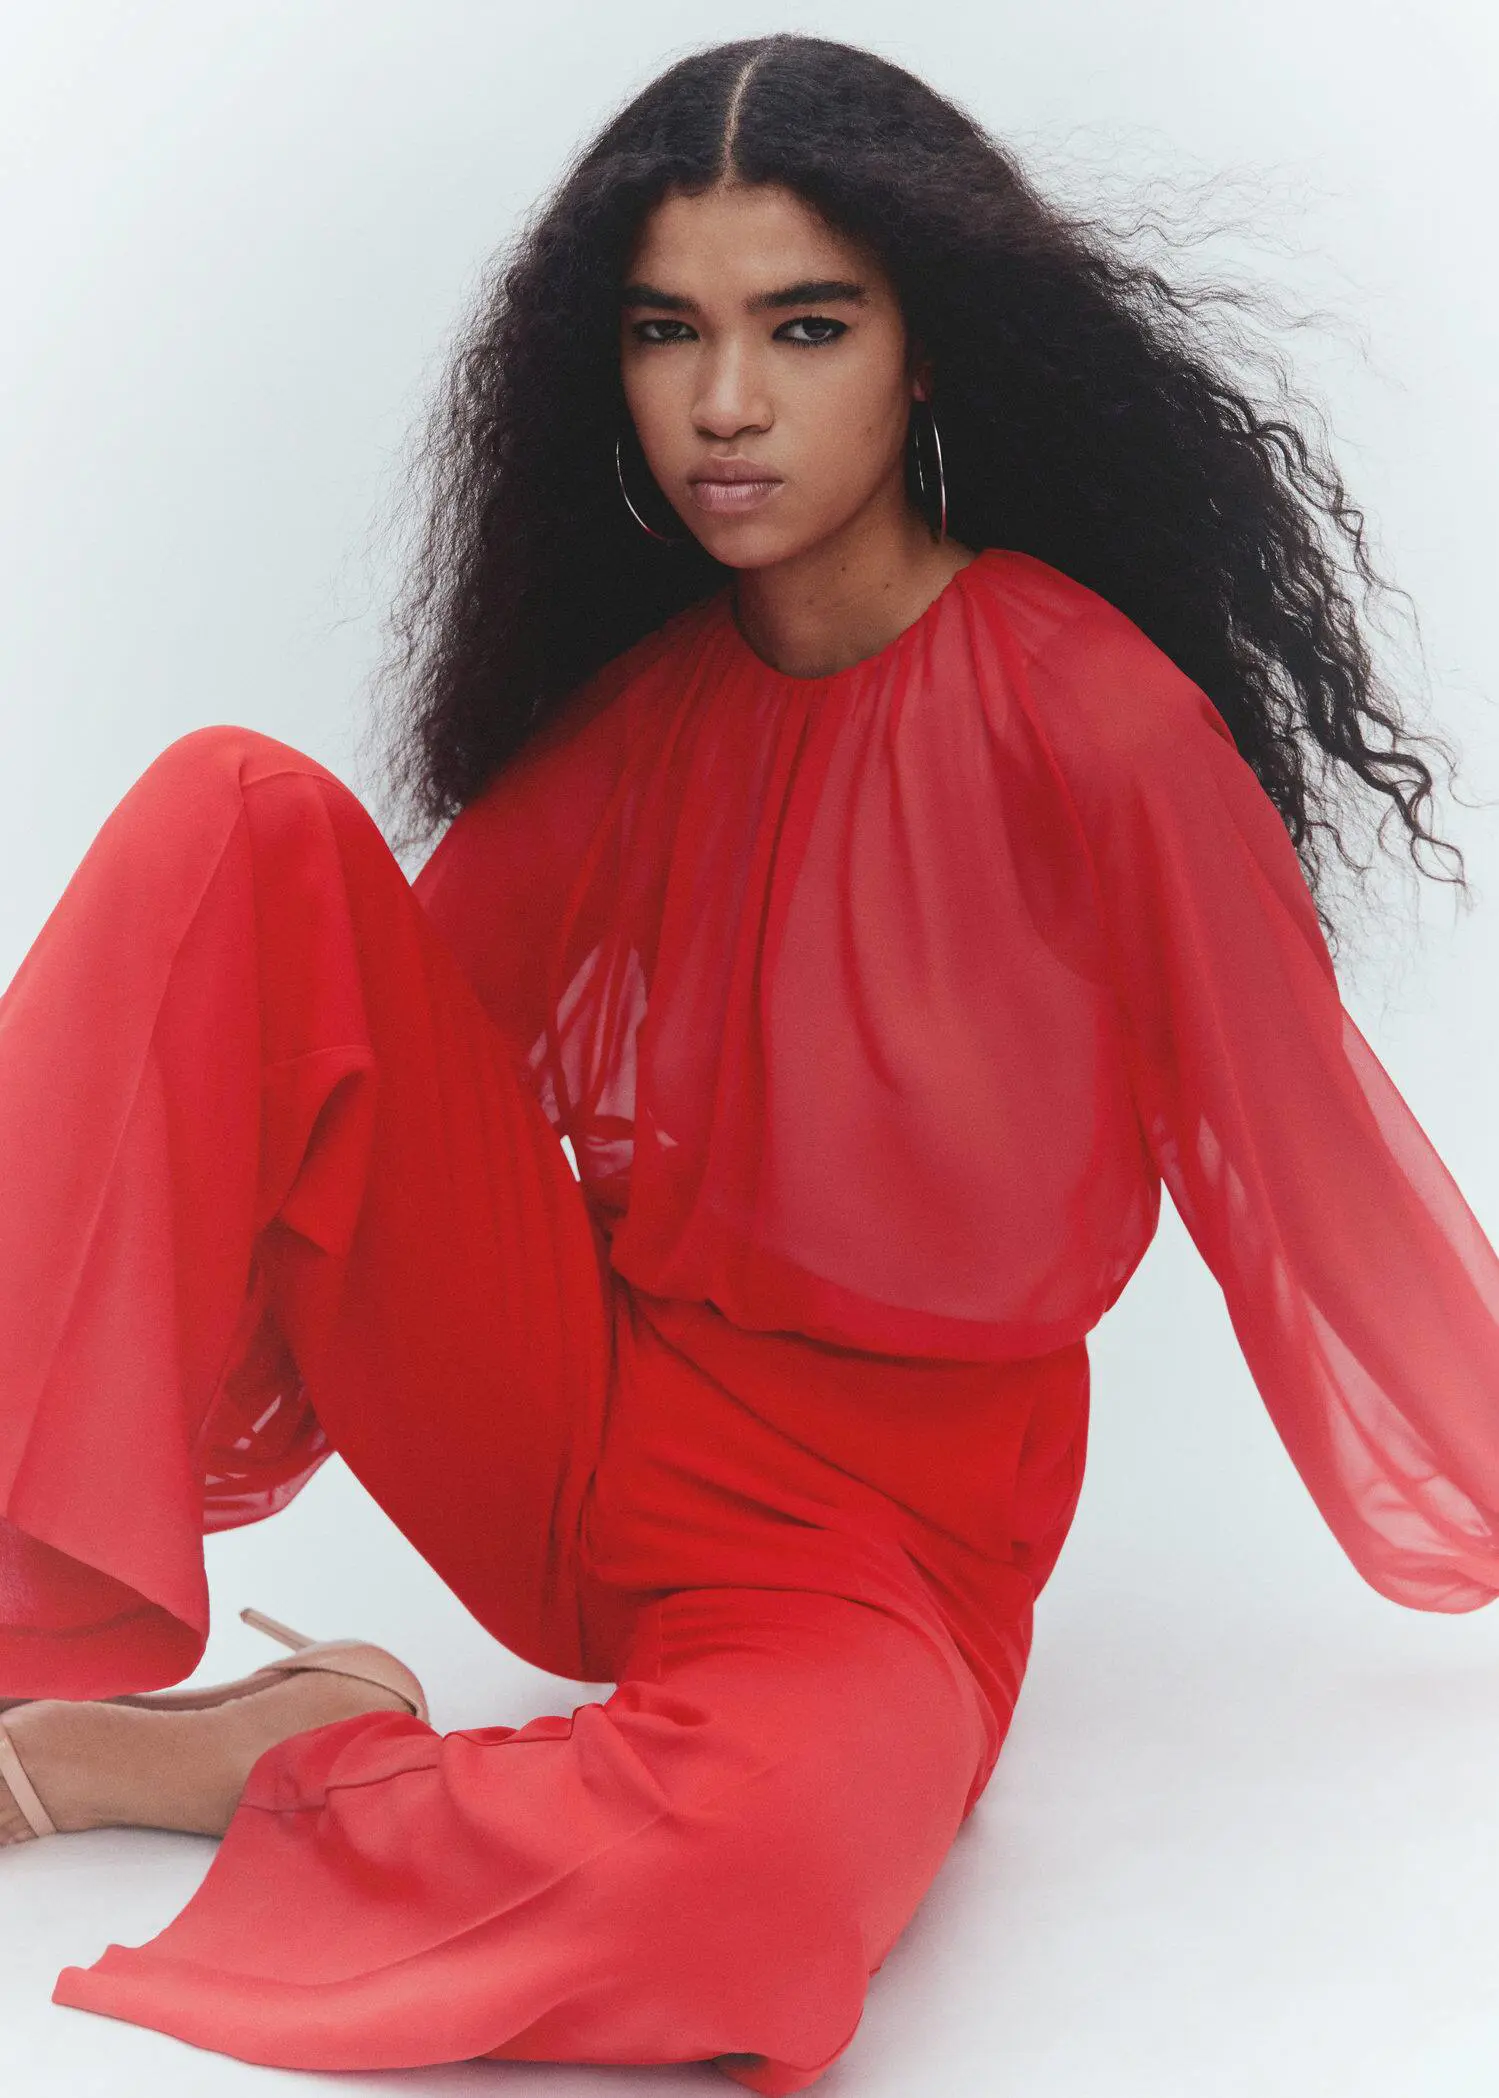 Mango Semi-transparent chiffon jumpsuit. a woman in a red outfit sitting on the ground. 